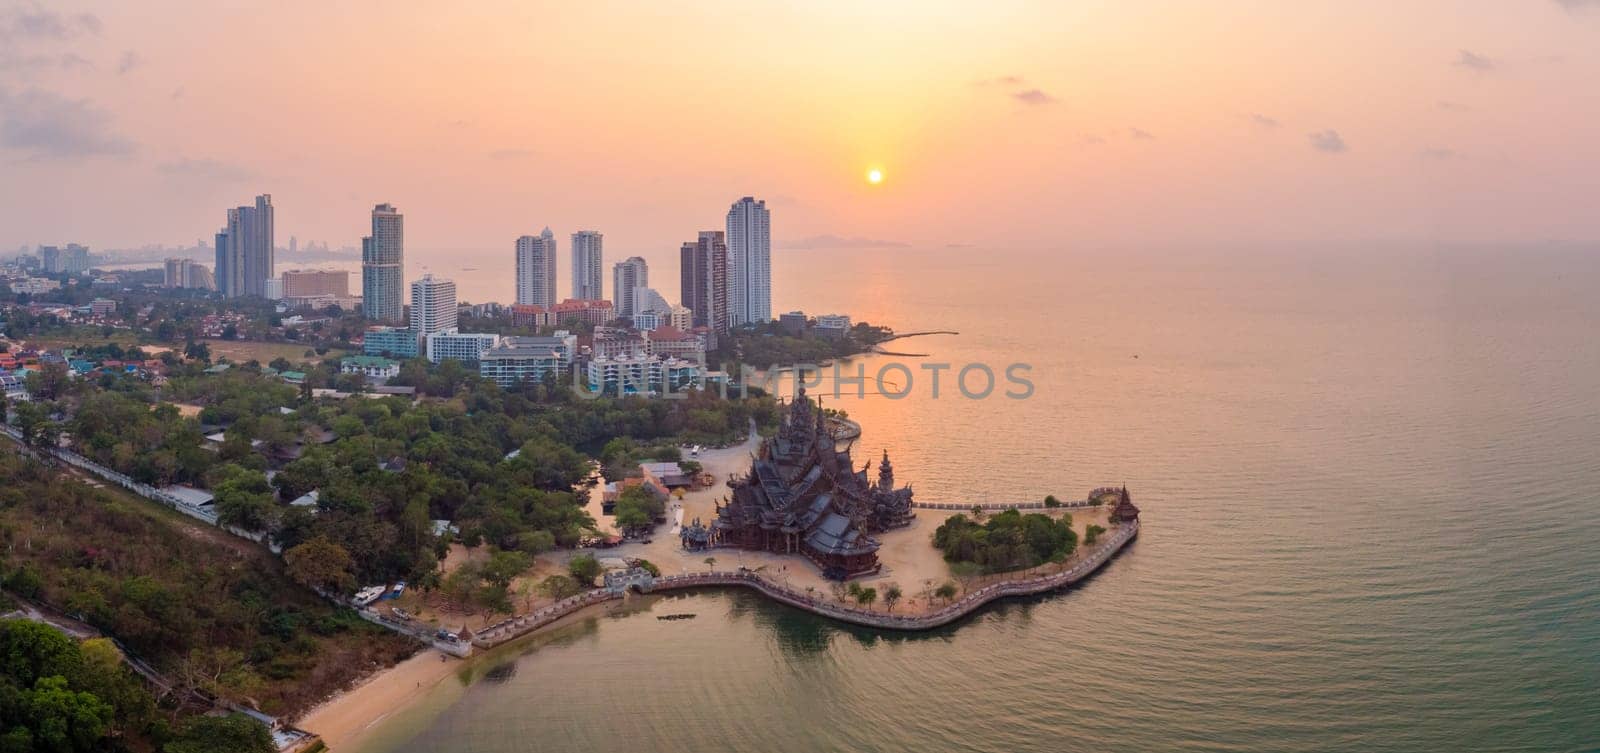 The Sanctuary of Truth wooden temple in Pattaya Thailand at sunset seen from the beach by the ocean, drone aerial view at Pattaya skyline